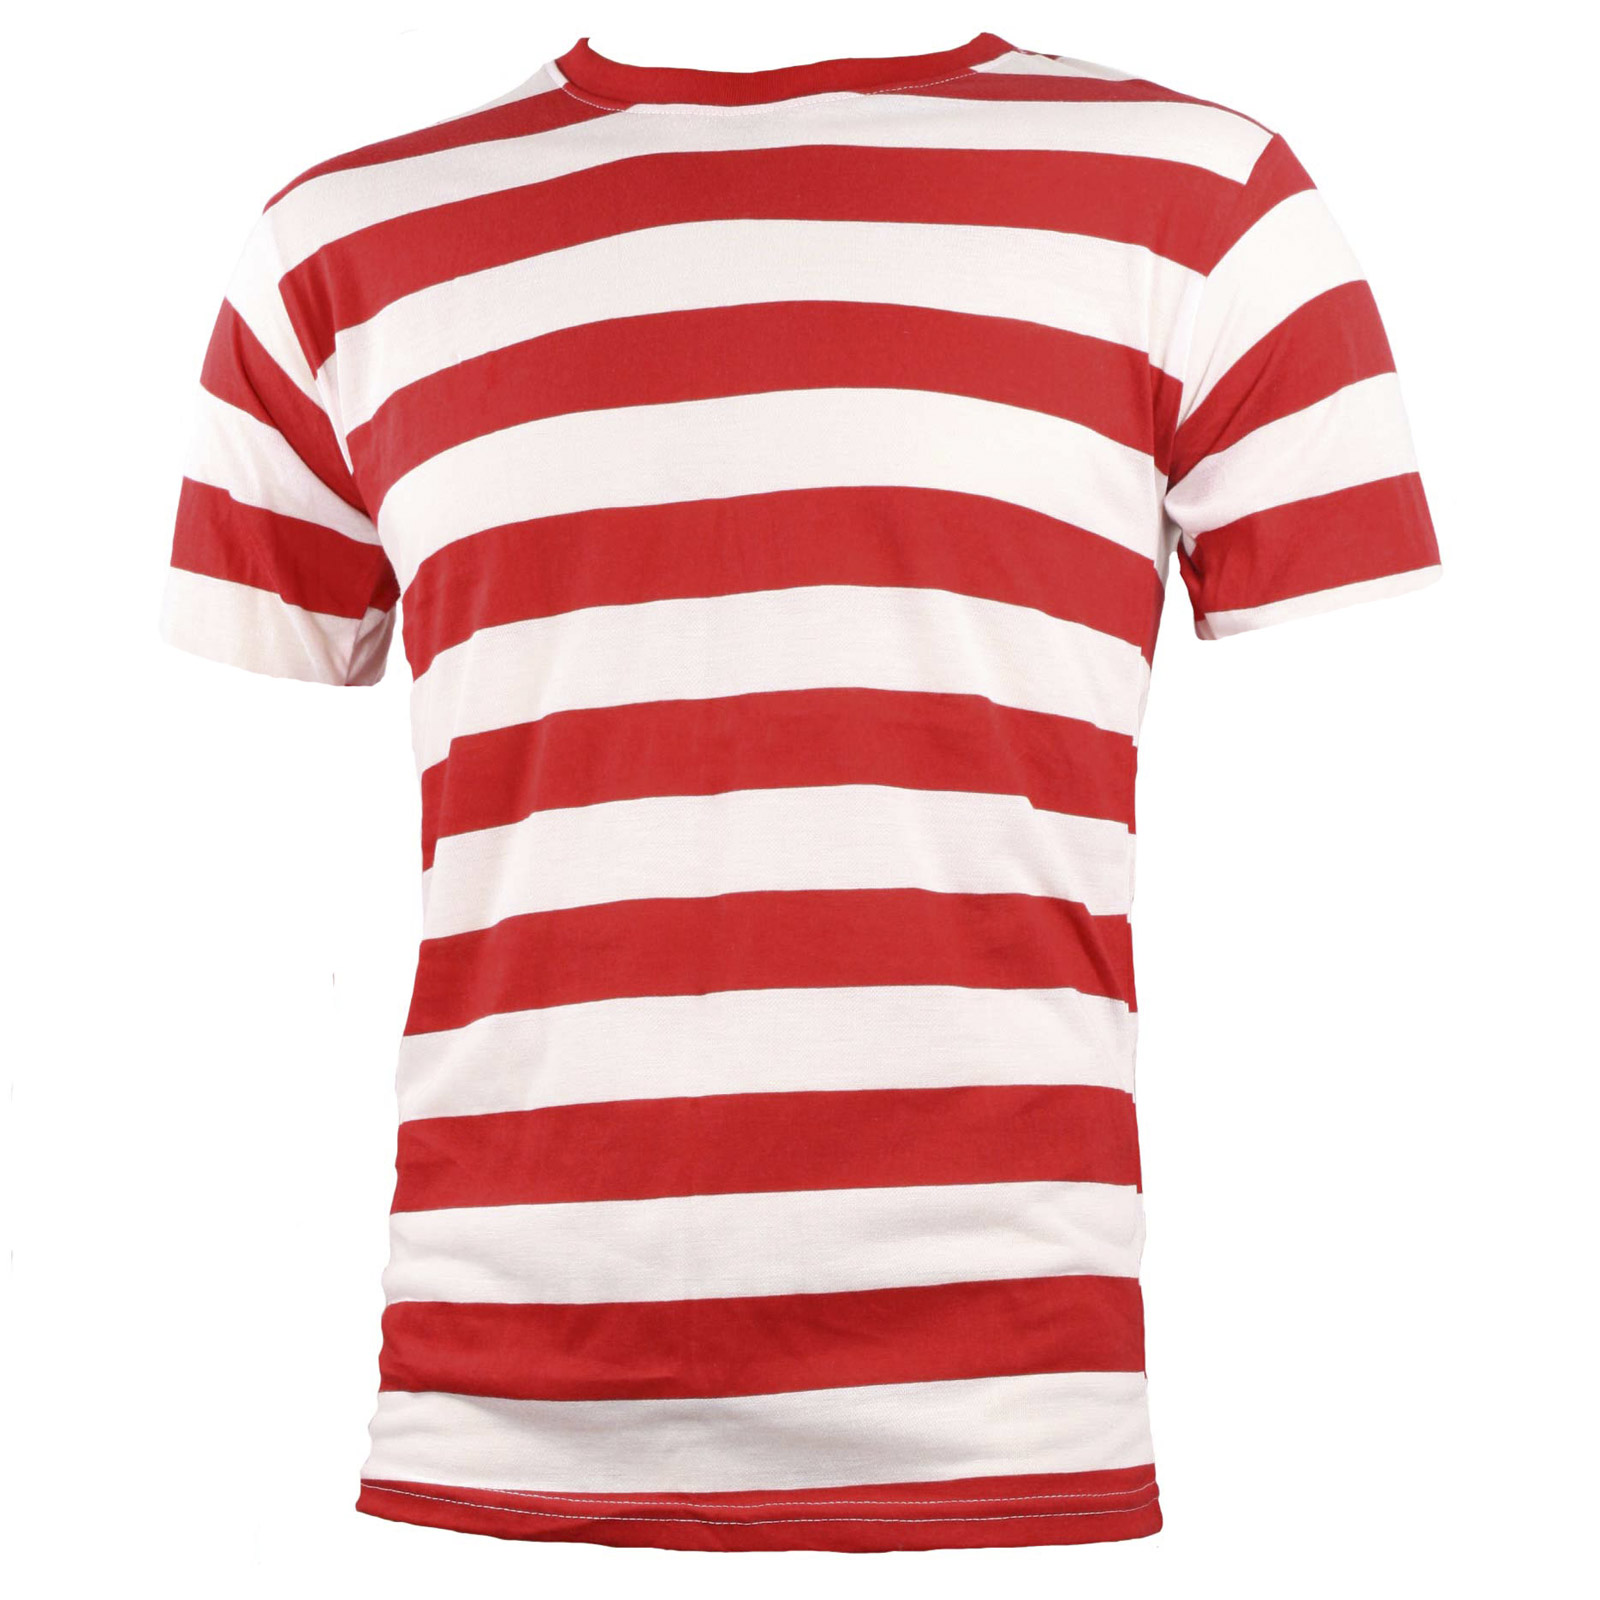 NYC Short Sleeve PUNK GOTH Emo mime Stripe Striped T Shirt Red White S ...